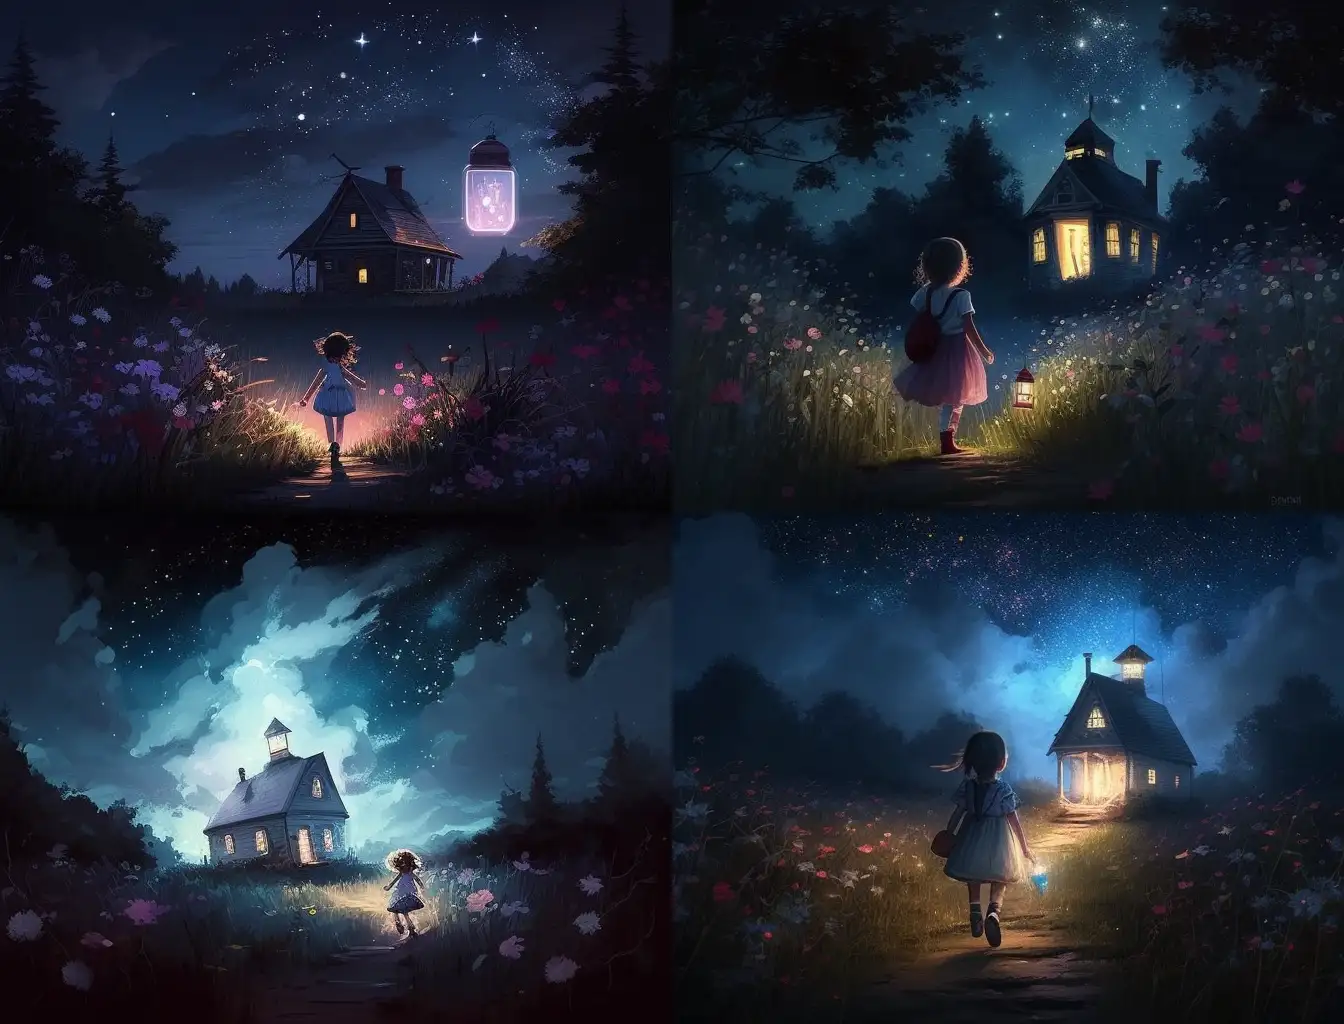 Young-Girls-Midnight-Adventure-Capturing-Fireflies-in-Meadow-by-Tiny-Red-Church